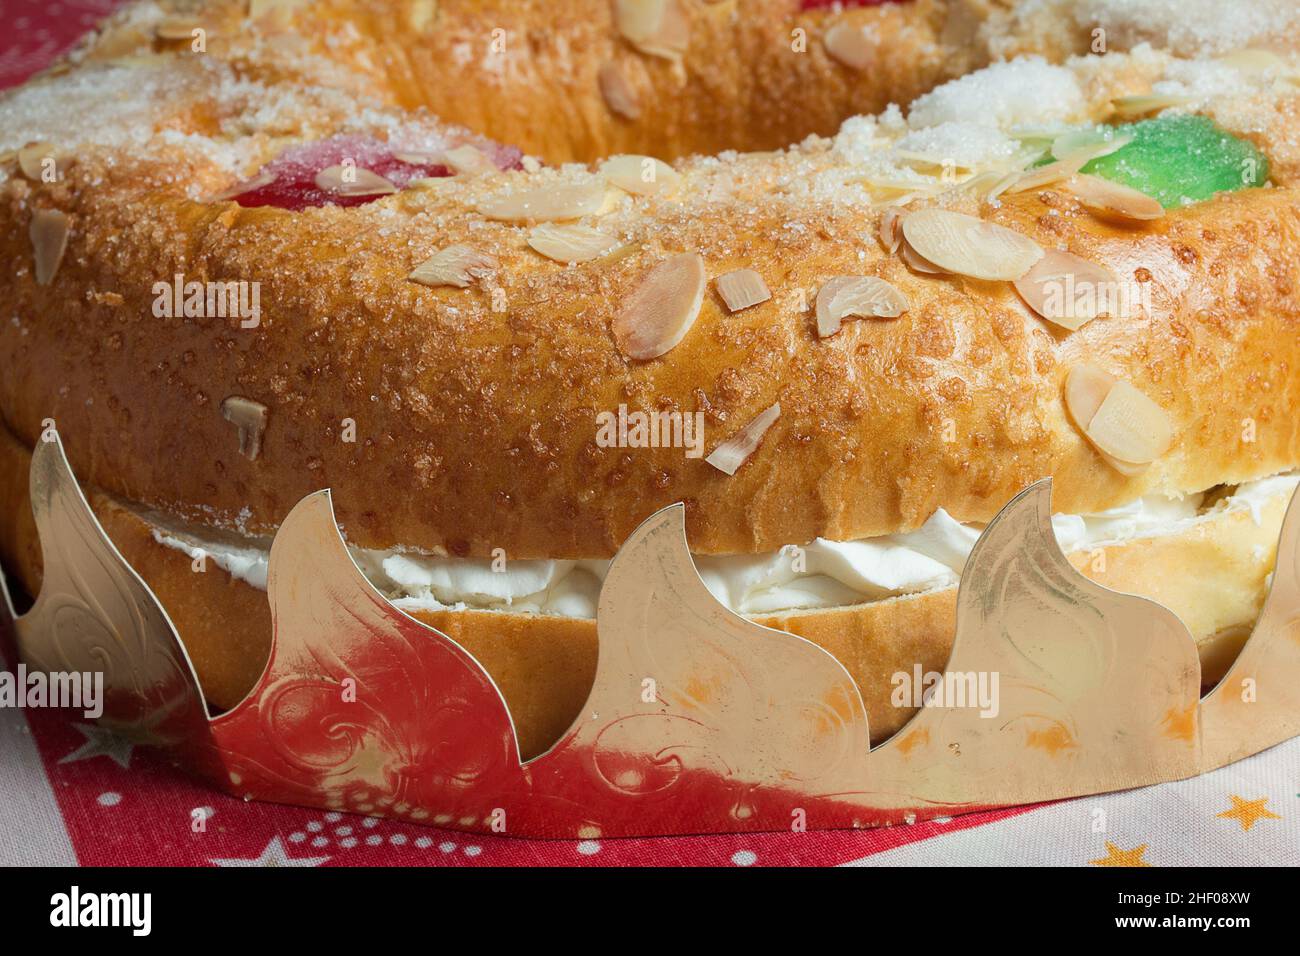 Close up of a giant donut cake filled with sweet whipped cream and meringue with candied fruits, almonds, and icing sugar surrounded by the traditiona Stock Photo